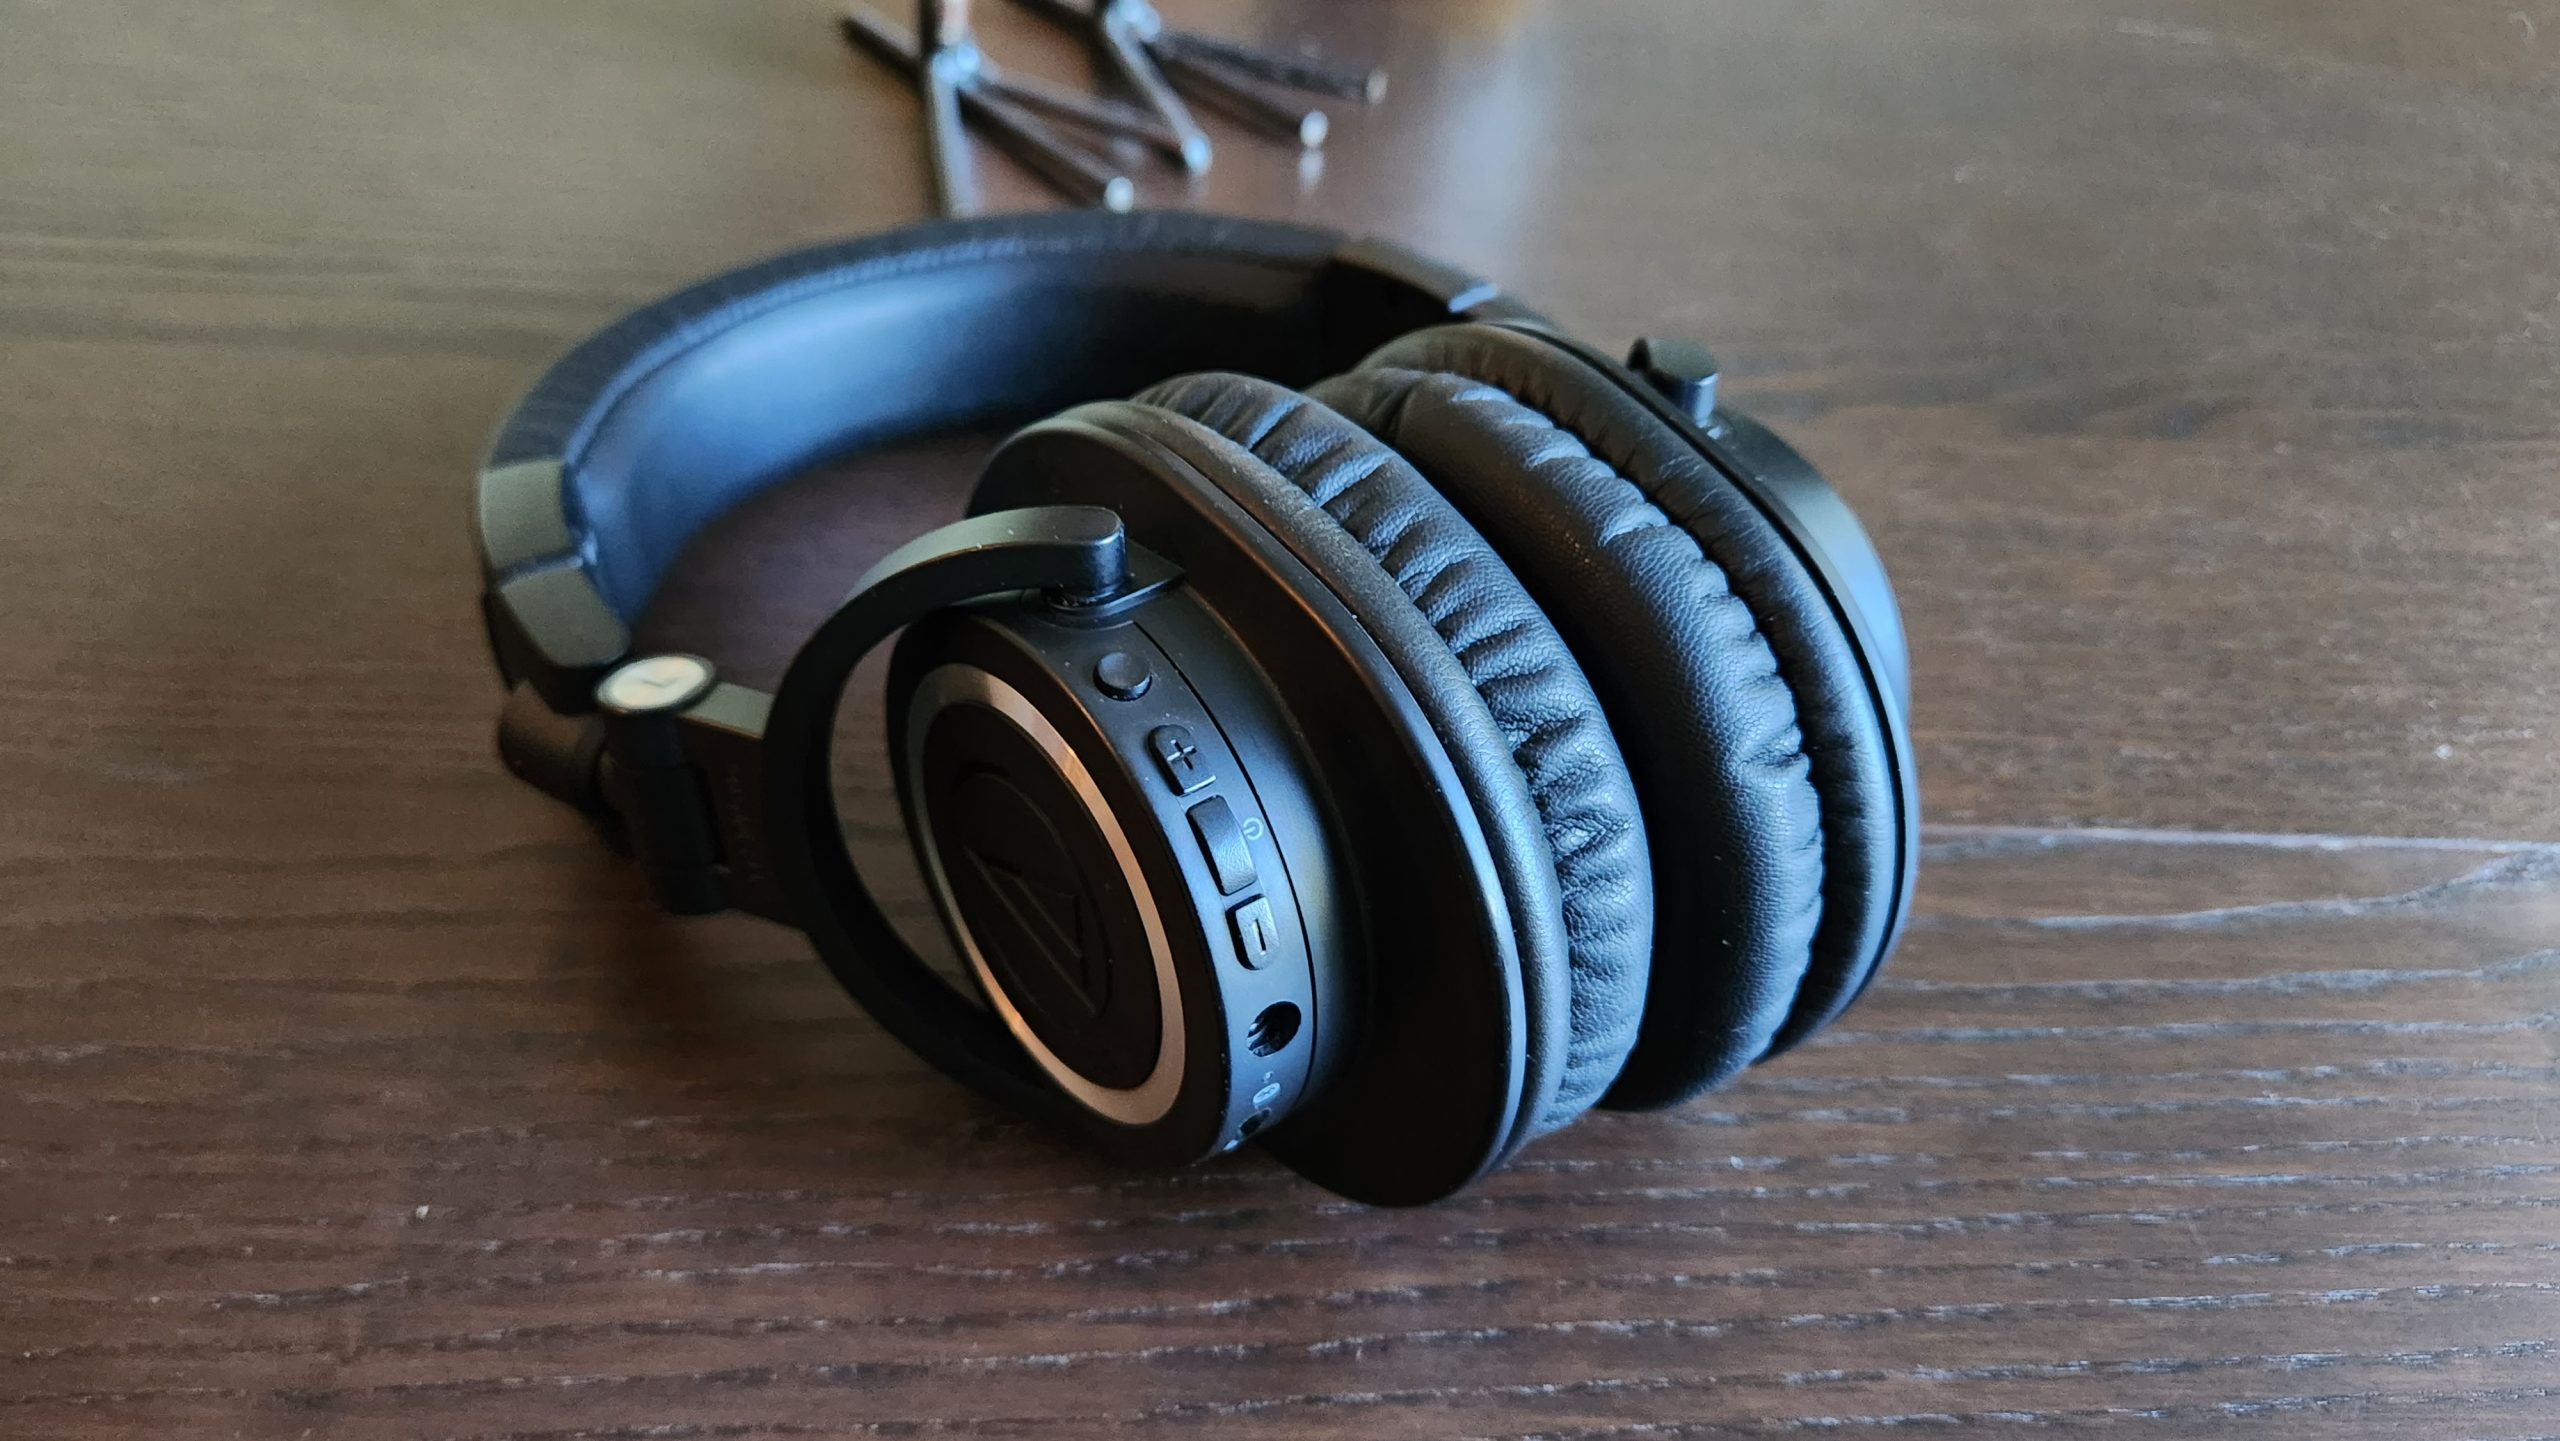 Audio Technica ATH-M50X Review (Closed Headphone)